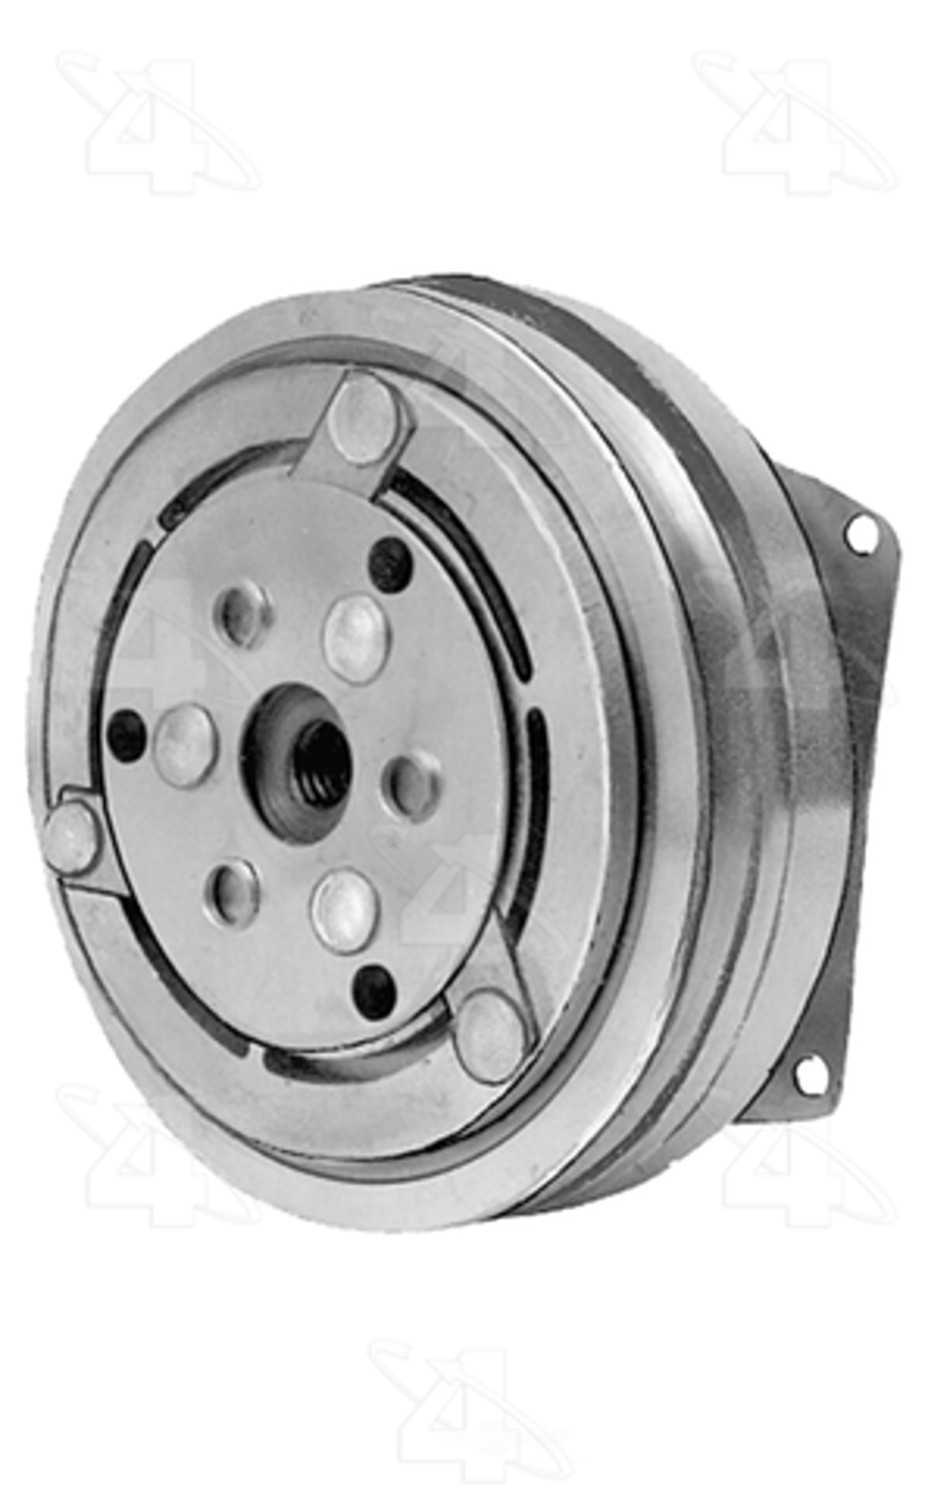 FOUR SEASONS - New Clutch Assembly - FSE 47811